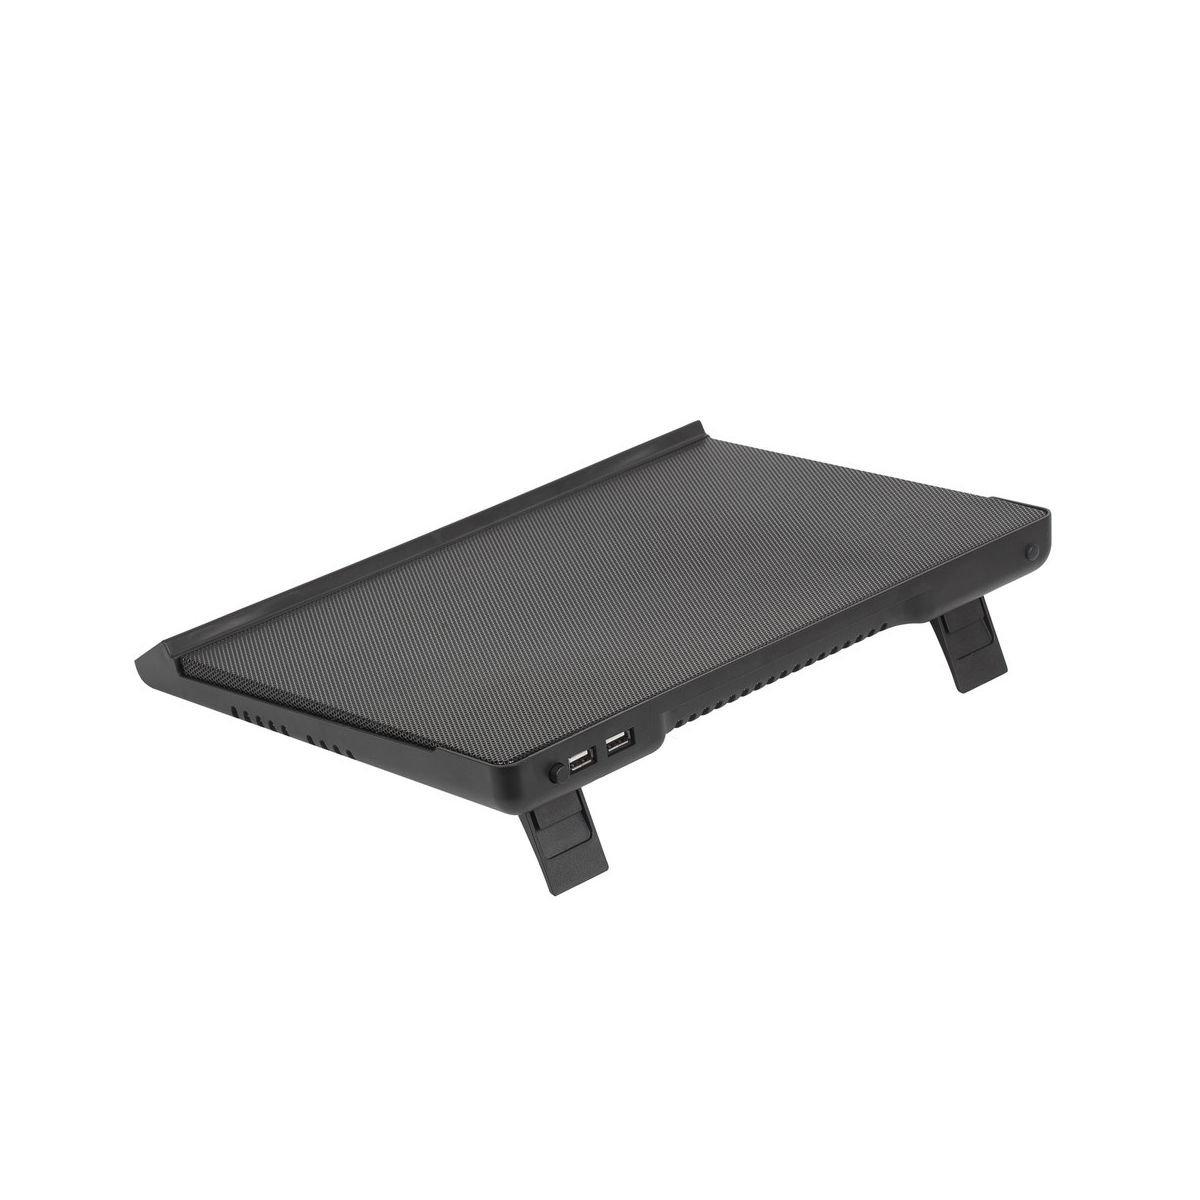 Buy Riva cooling pad for laptop up to 17. 3-inch (5556) - black in Kuwait